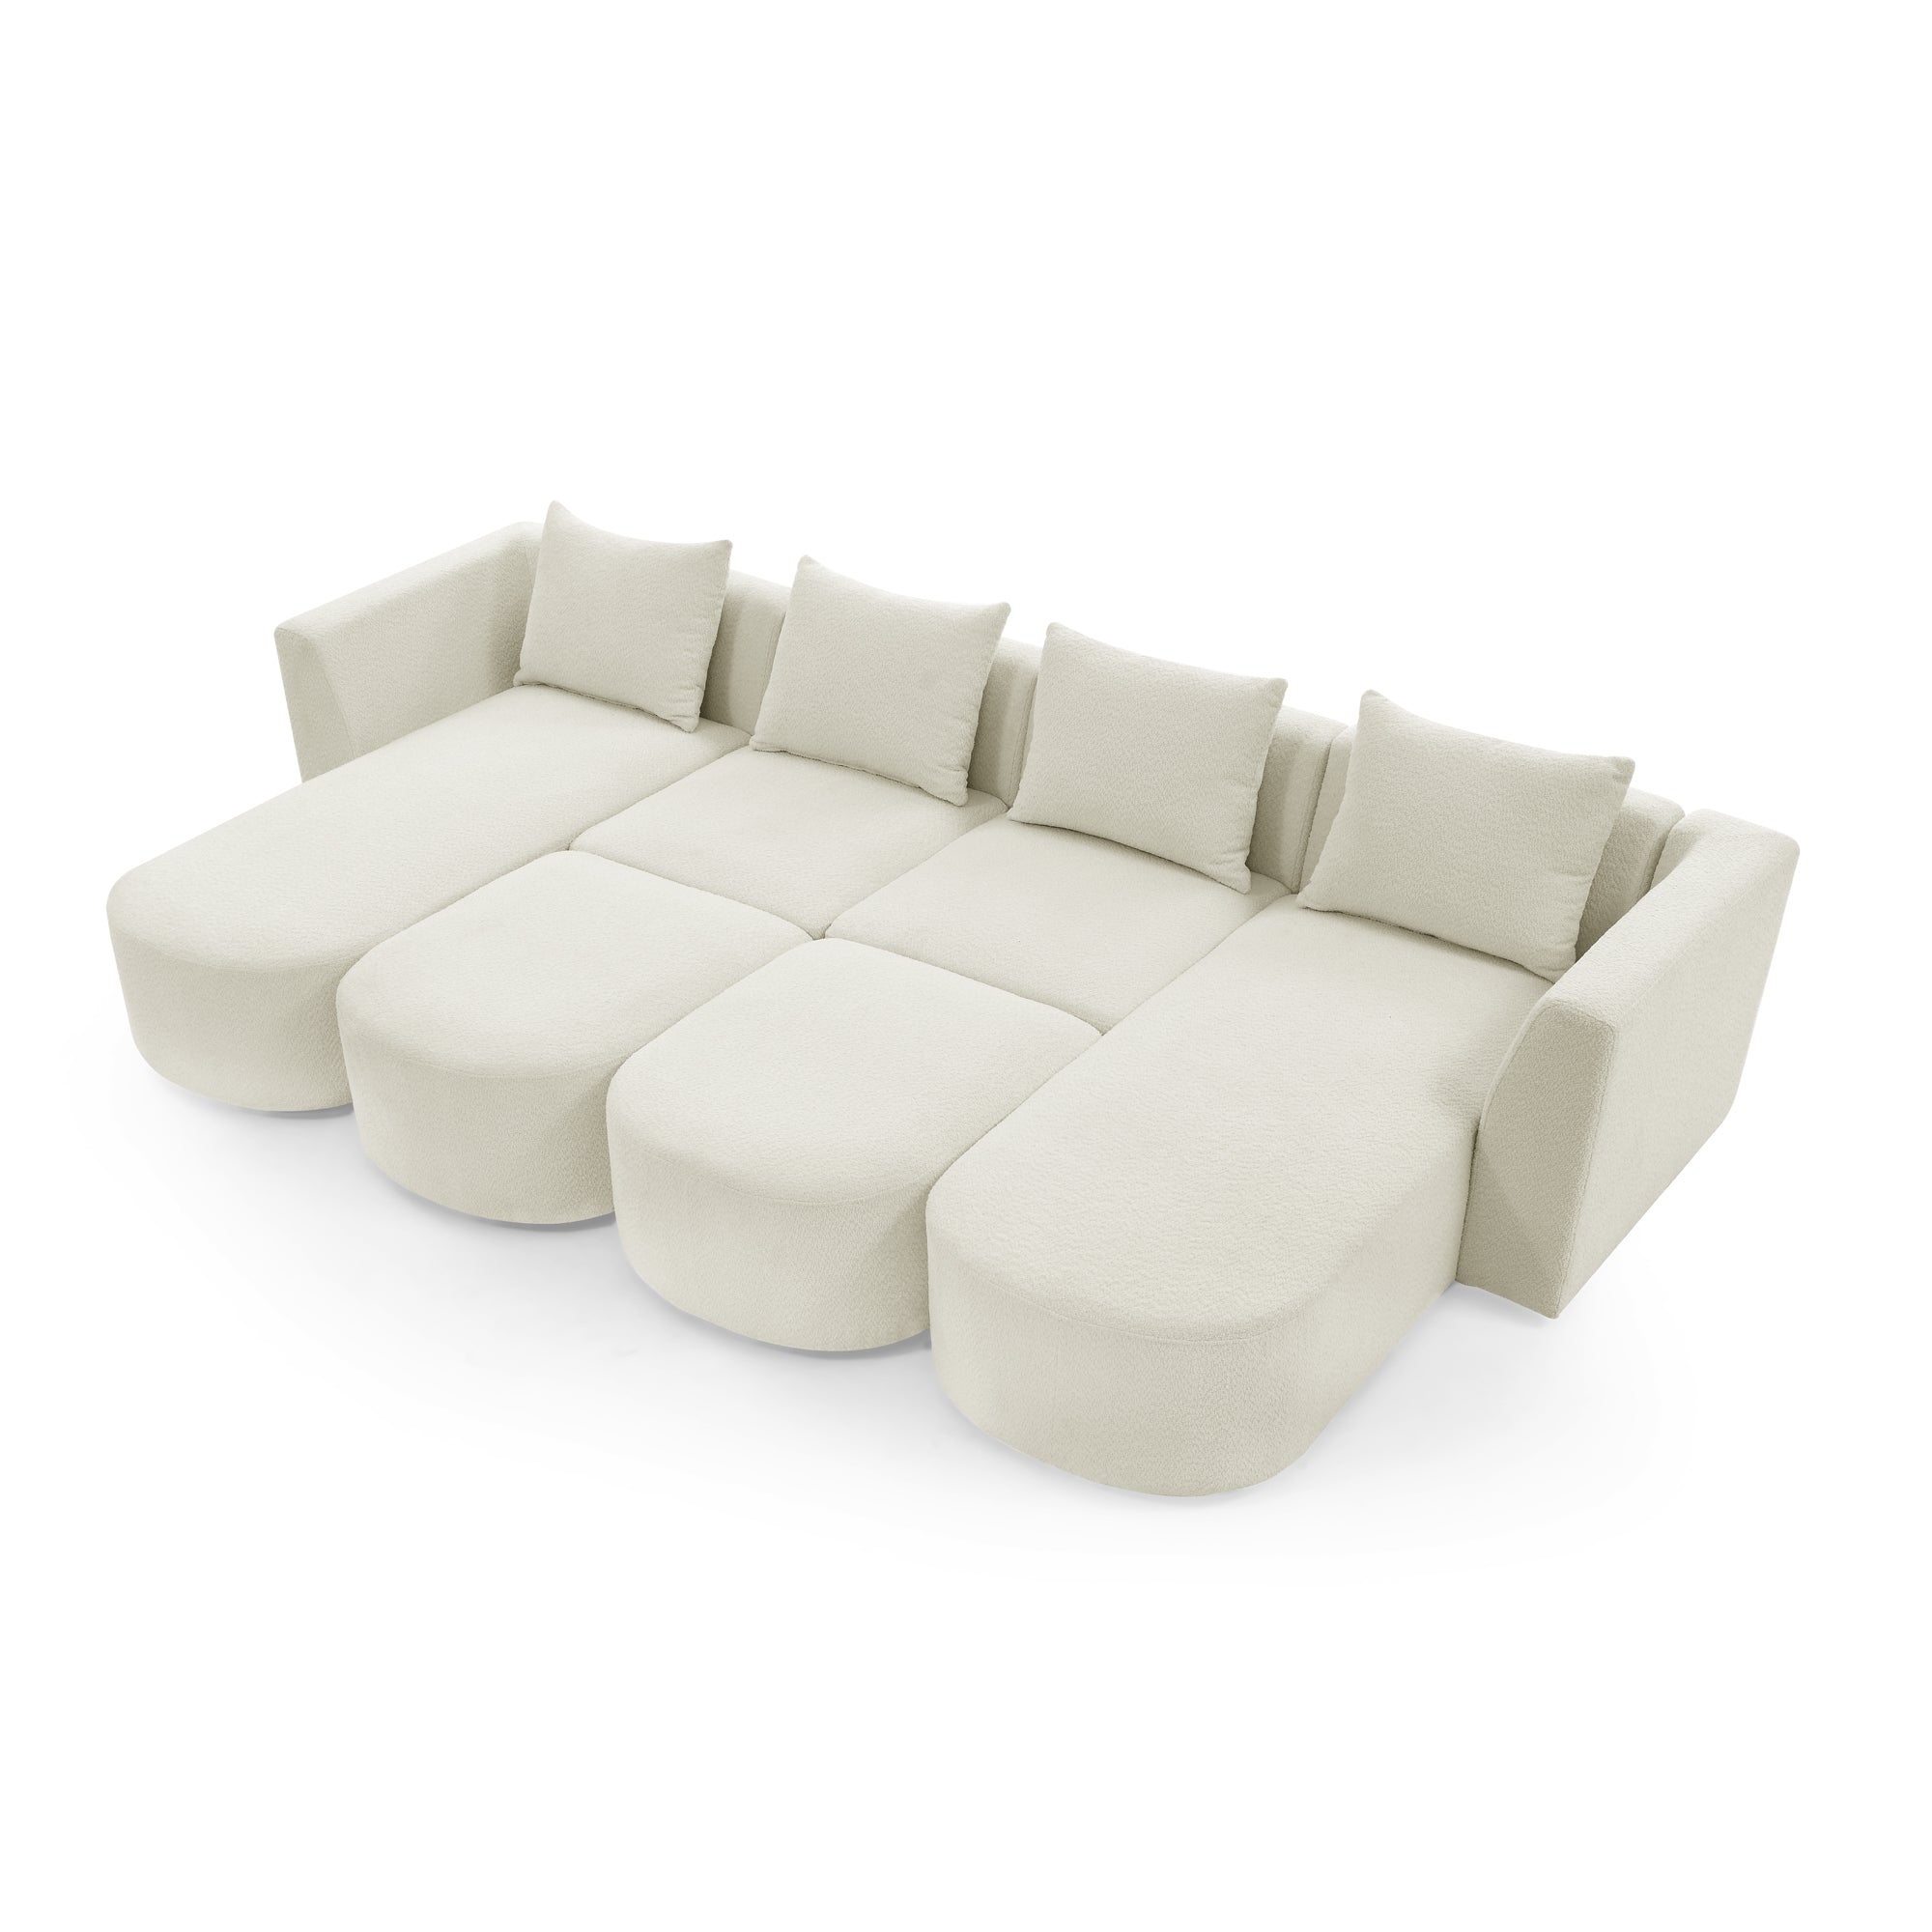 Bellemave 117" U-Shape Sectional Sofa including Two Single Seat, Two Chaises and Two Ottomans, DIY Combination Bellemave